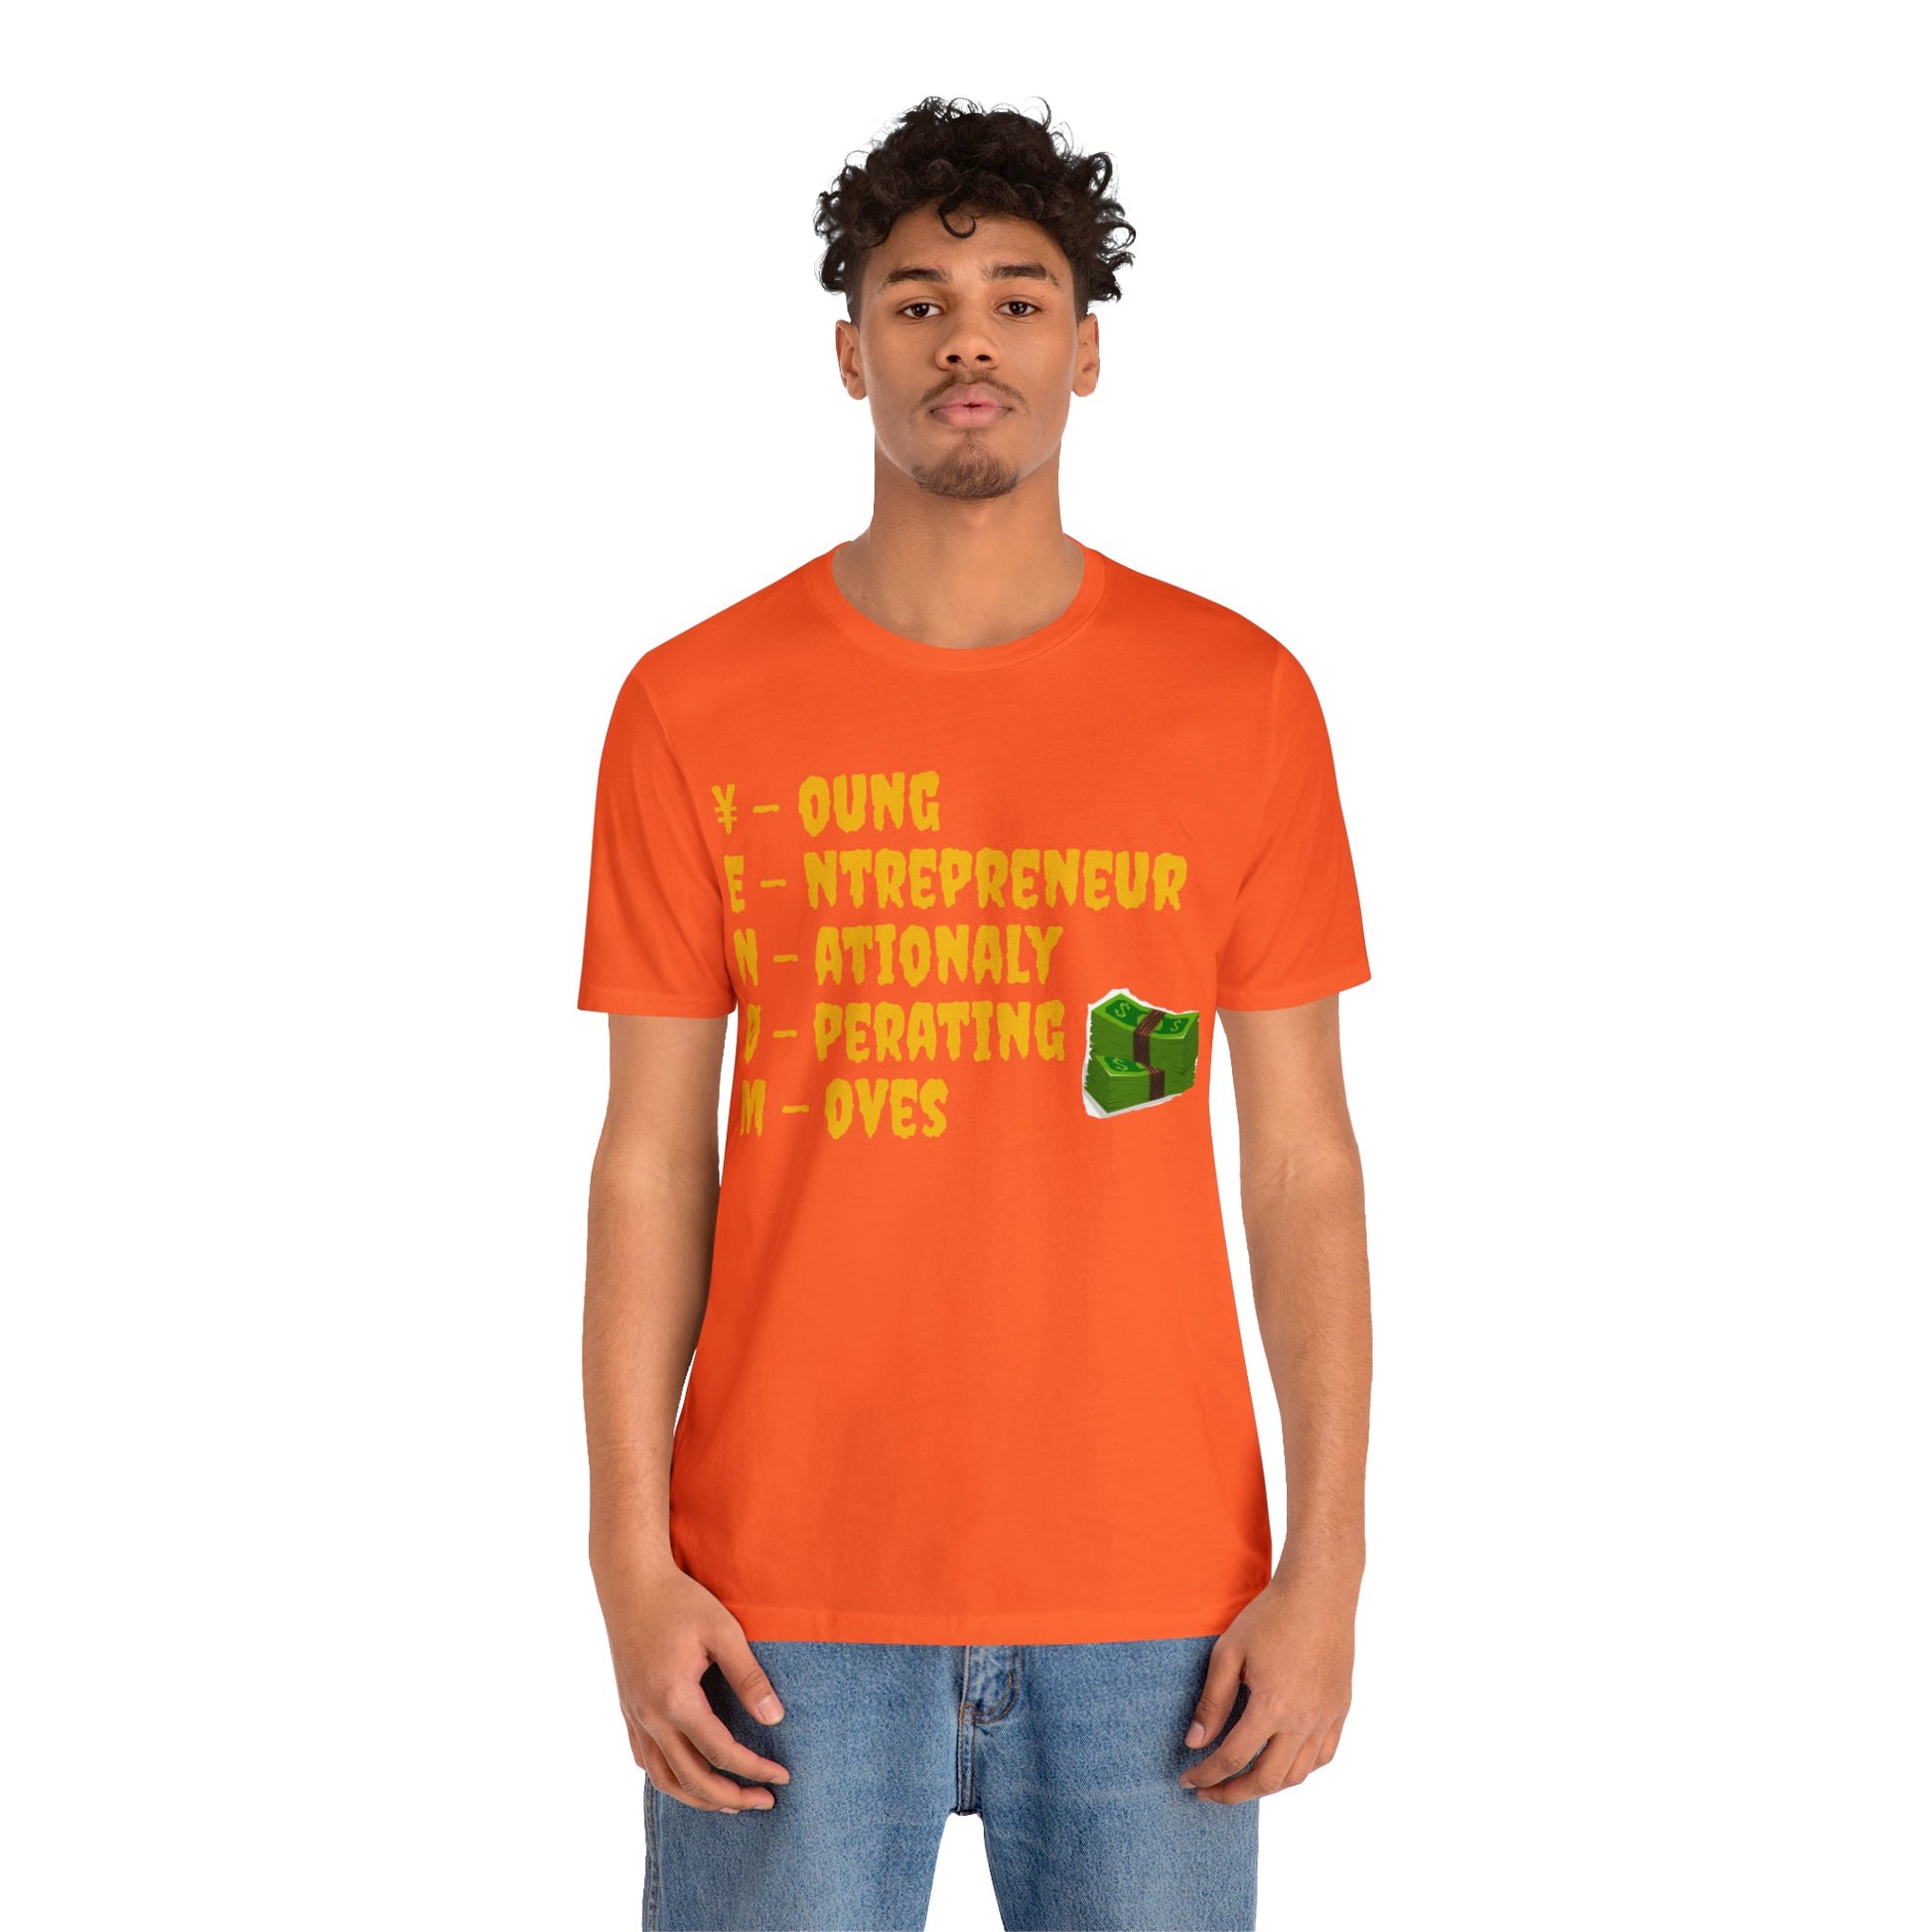 WILKYsT-ShirtUnisex Jersey Short Sleeve TeeThis classic unisex jersey short sleeve tee fits like a well-loved favorite. Soft cotton and quality print make users fall in love with it over and over again. These